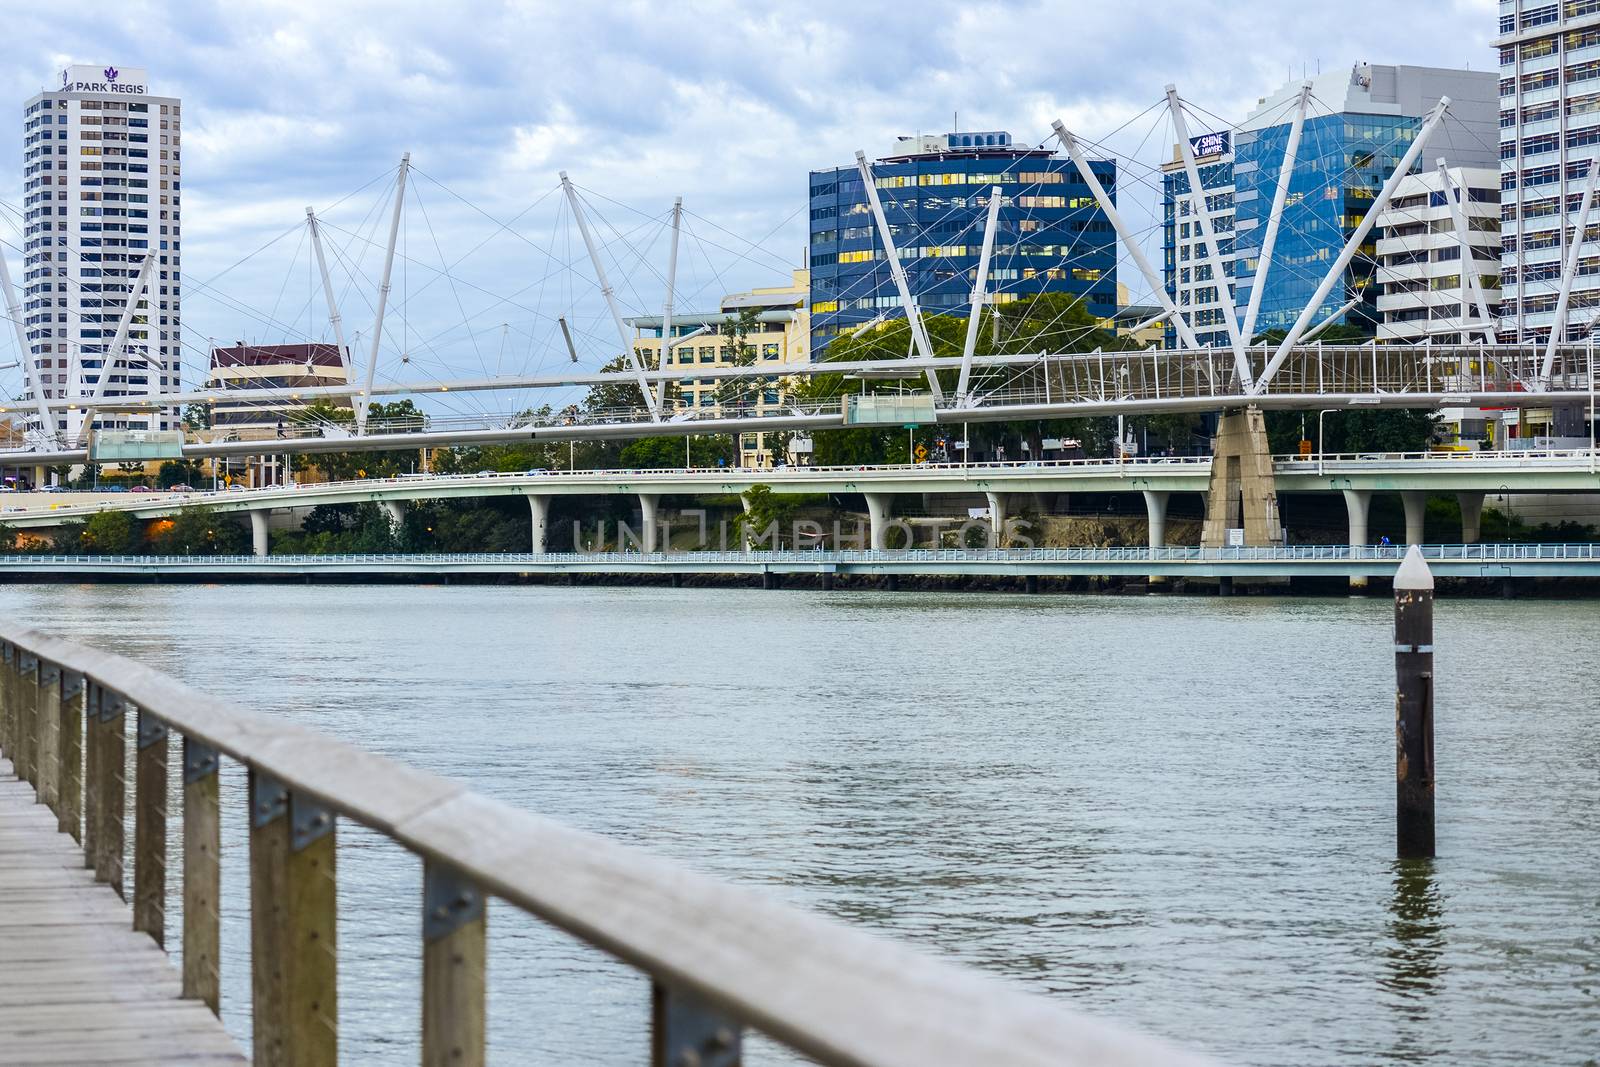 Brisbane, Australia - Tuesday 23rd June, 2015: View of Kurilpa Bridge and Brisbane City in the daytime from Southbank on Tuesday the 23rd June 2015. by artistrobd